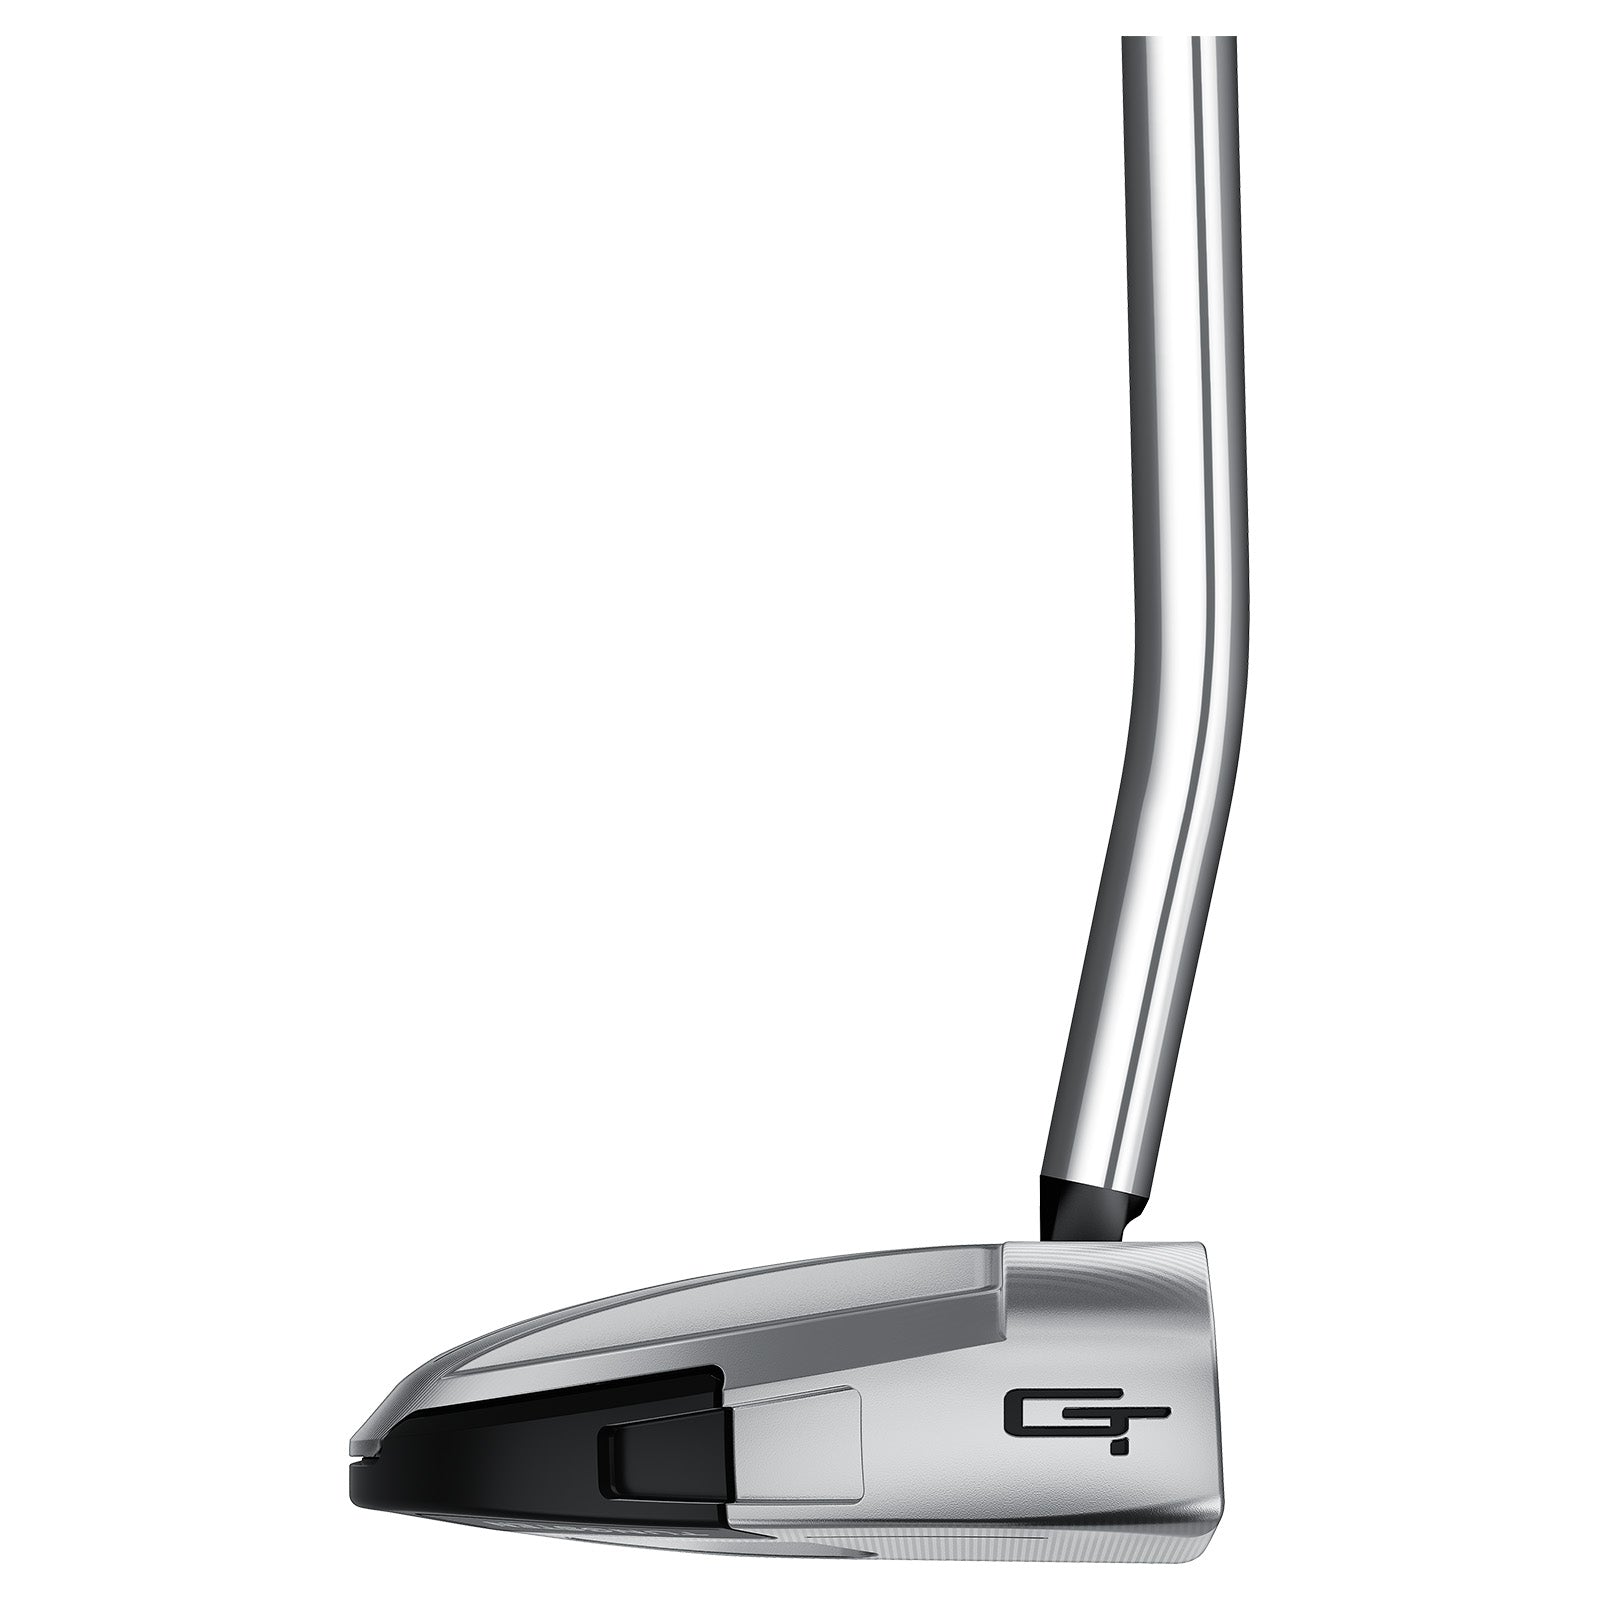 TaylorMade Mens Spider GT Single Bend Putters